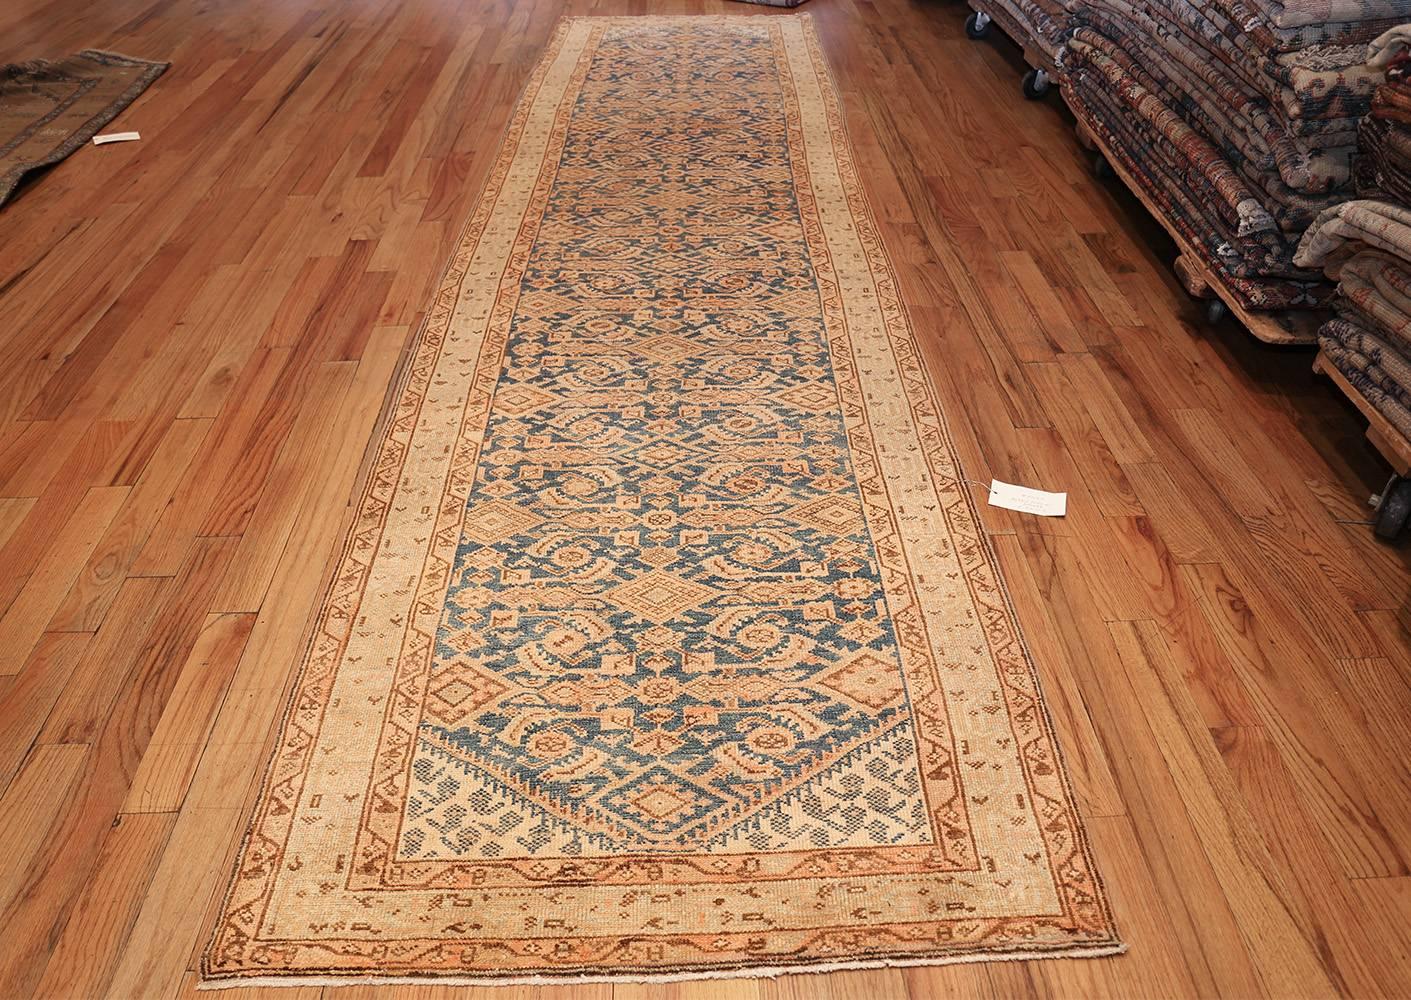 Beautiful antique light blue Persian Malayer runner oriental rug, Country of Origin / Rug Type: Persian rugs, circa late 19th century, true to its traditional antique Persian Malayer rug roots, this vivacious antique Persian runner rug displays an